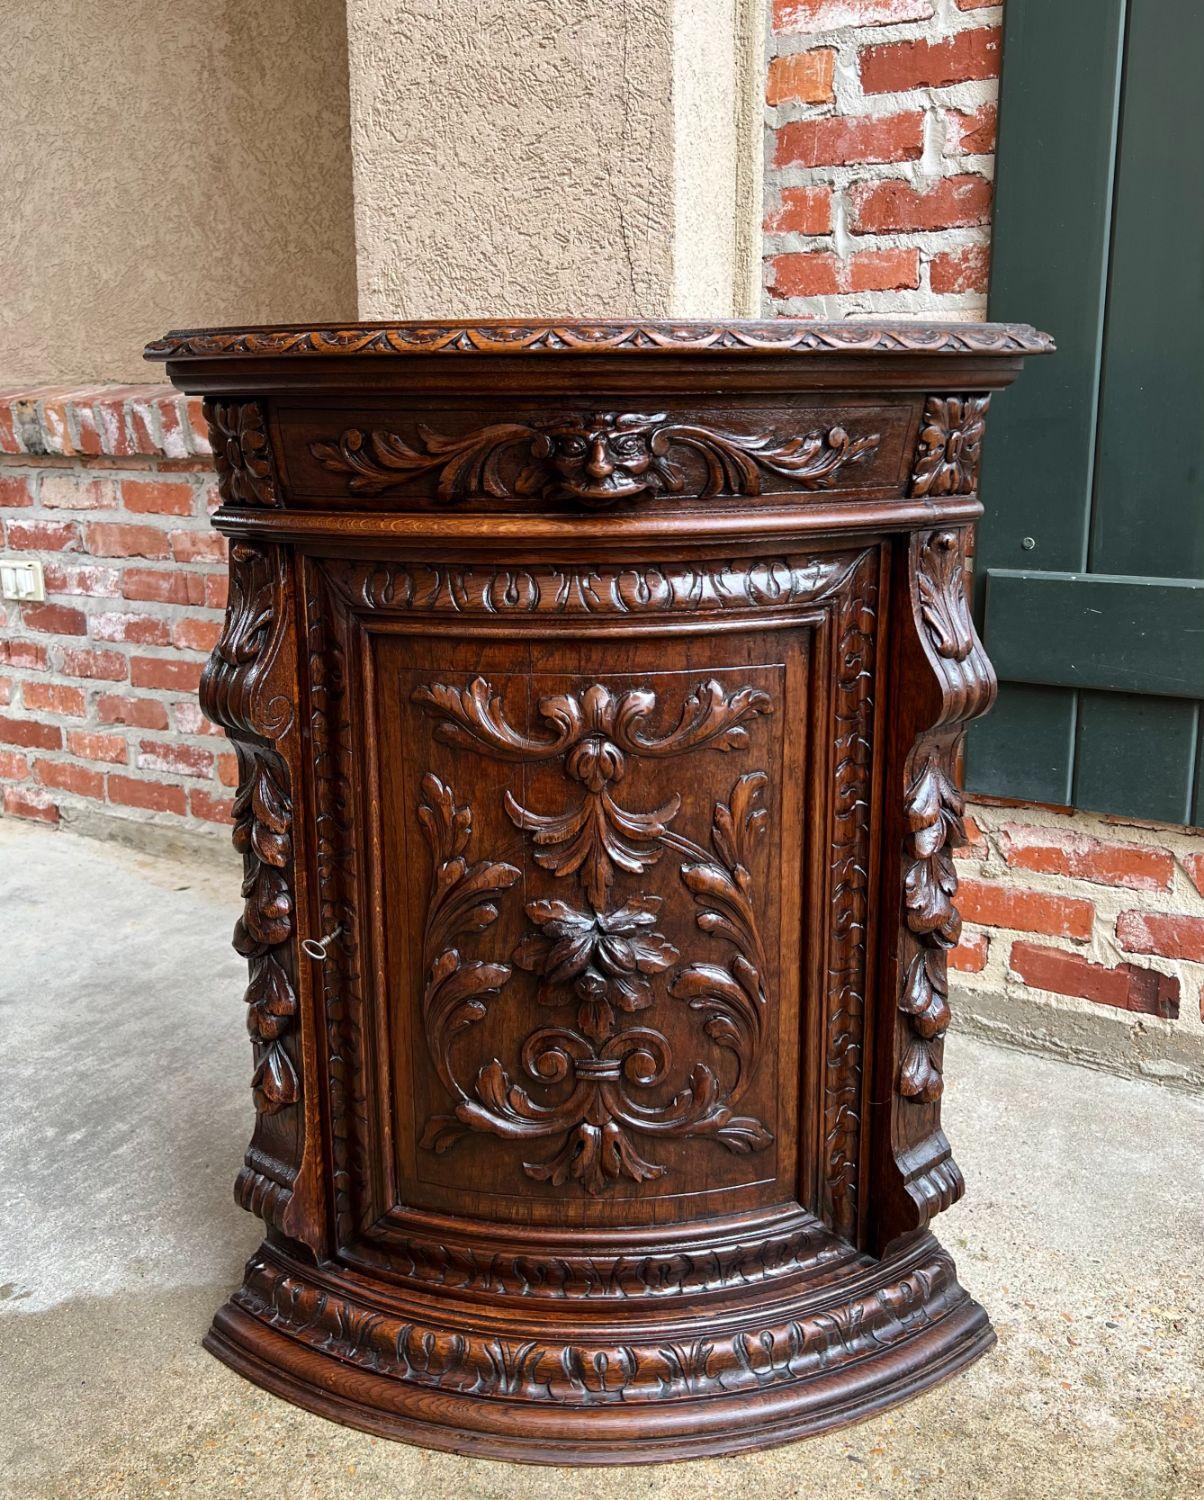 19th century French carved oak corner cabinet renaissance petite arched front.

Direct from France, a beautifully hand carved corner cabinet, in a petite size, perfect for placement in so many areas (very suitable for a vanity sink)!
Carved beveled